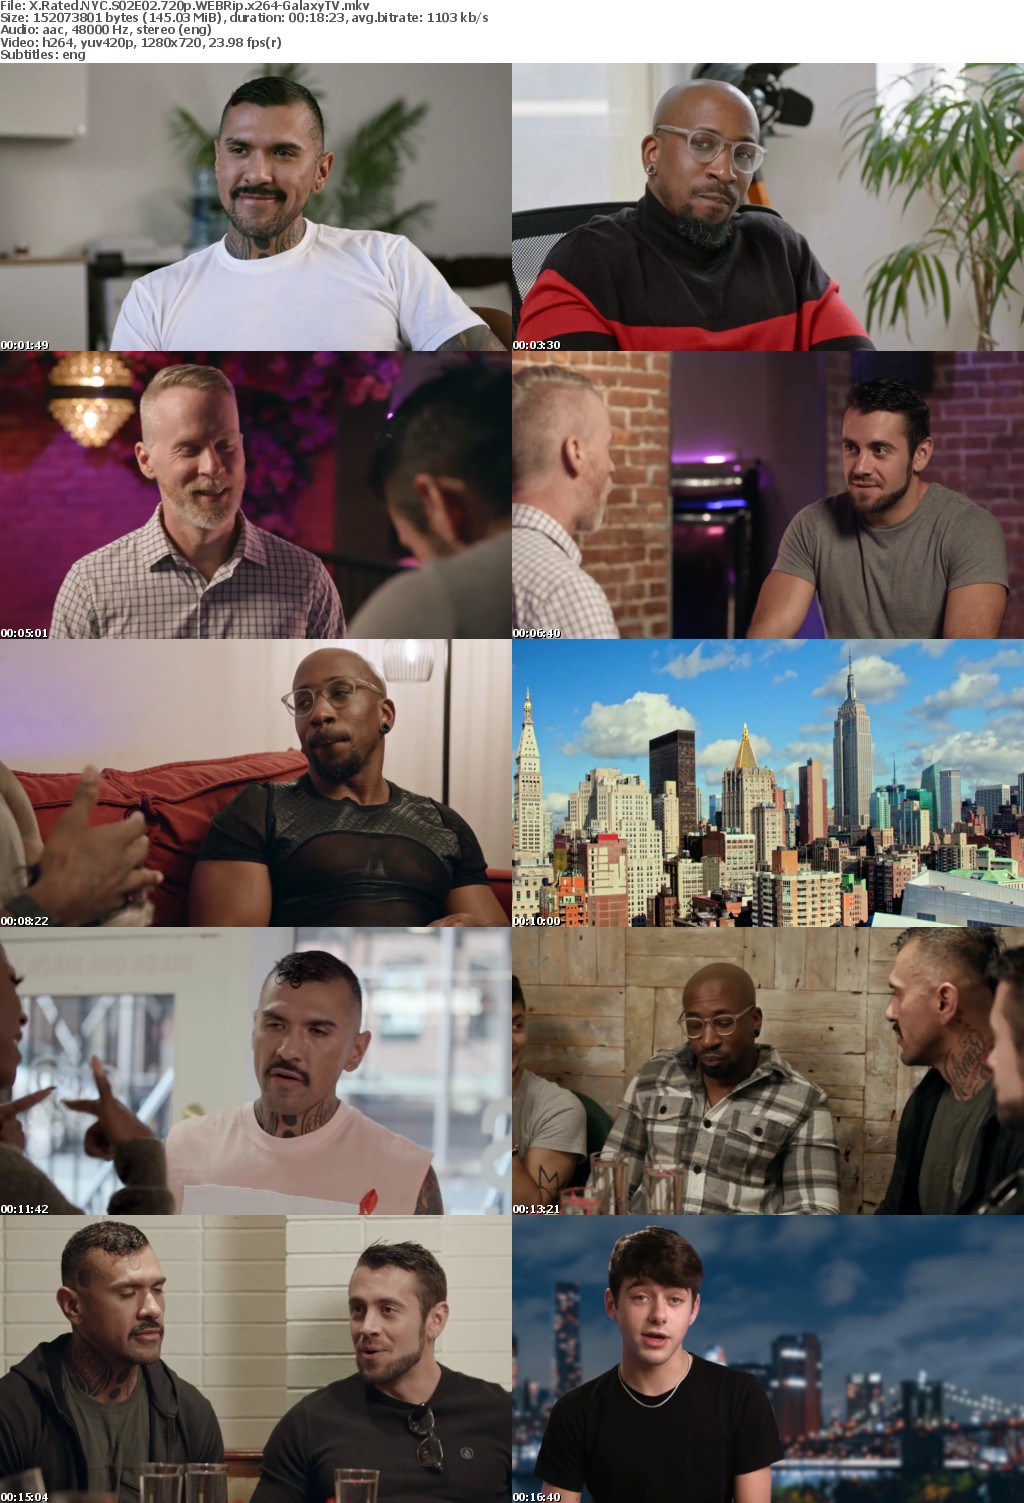 X Rated NYC S02 COMPLETE 720p WEBRip x264-GalaxyTV